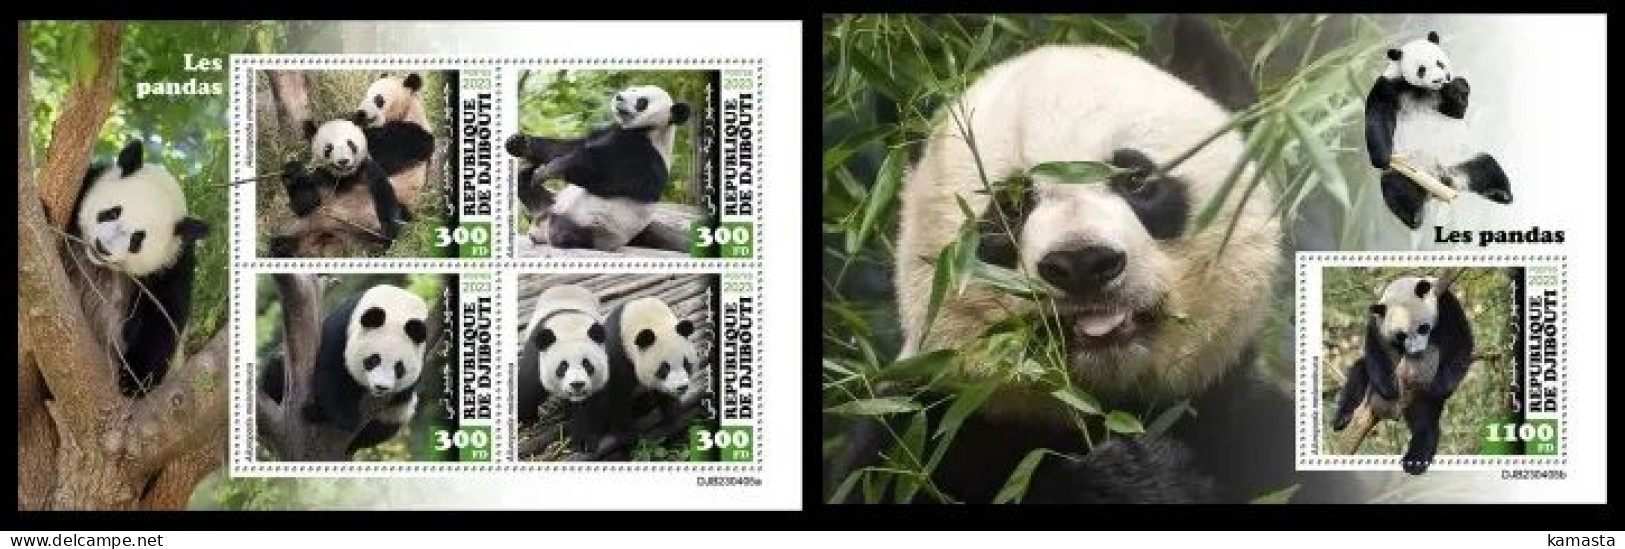 Djibouti 2023 Pandas. (405) OFFICIAL ISSUE - Ours